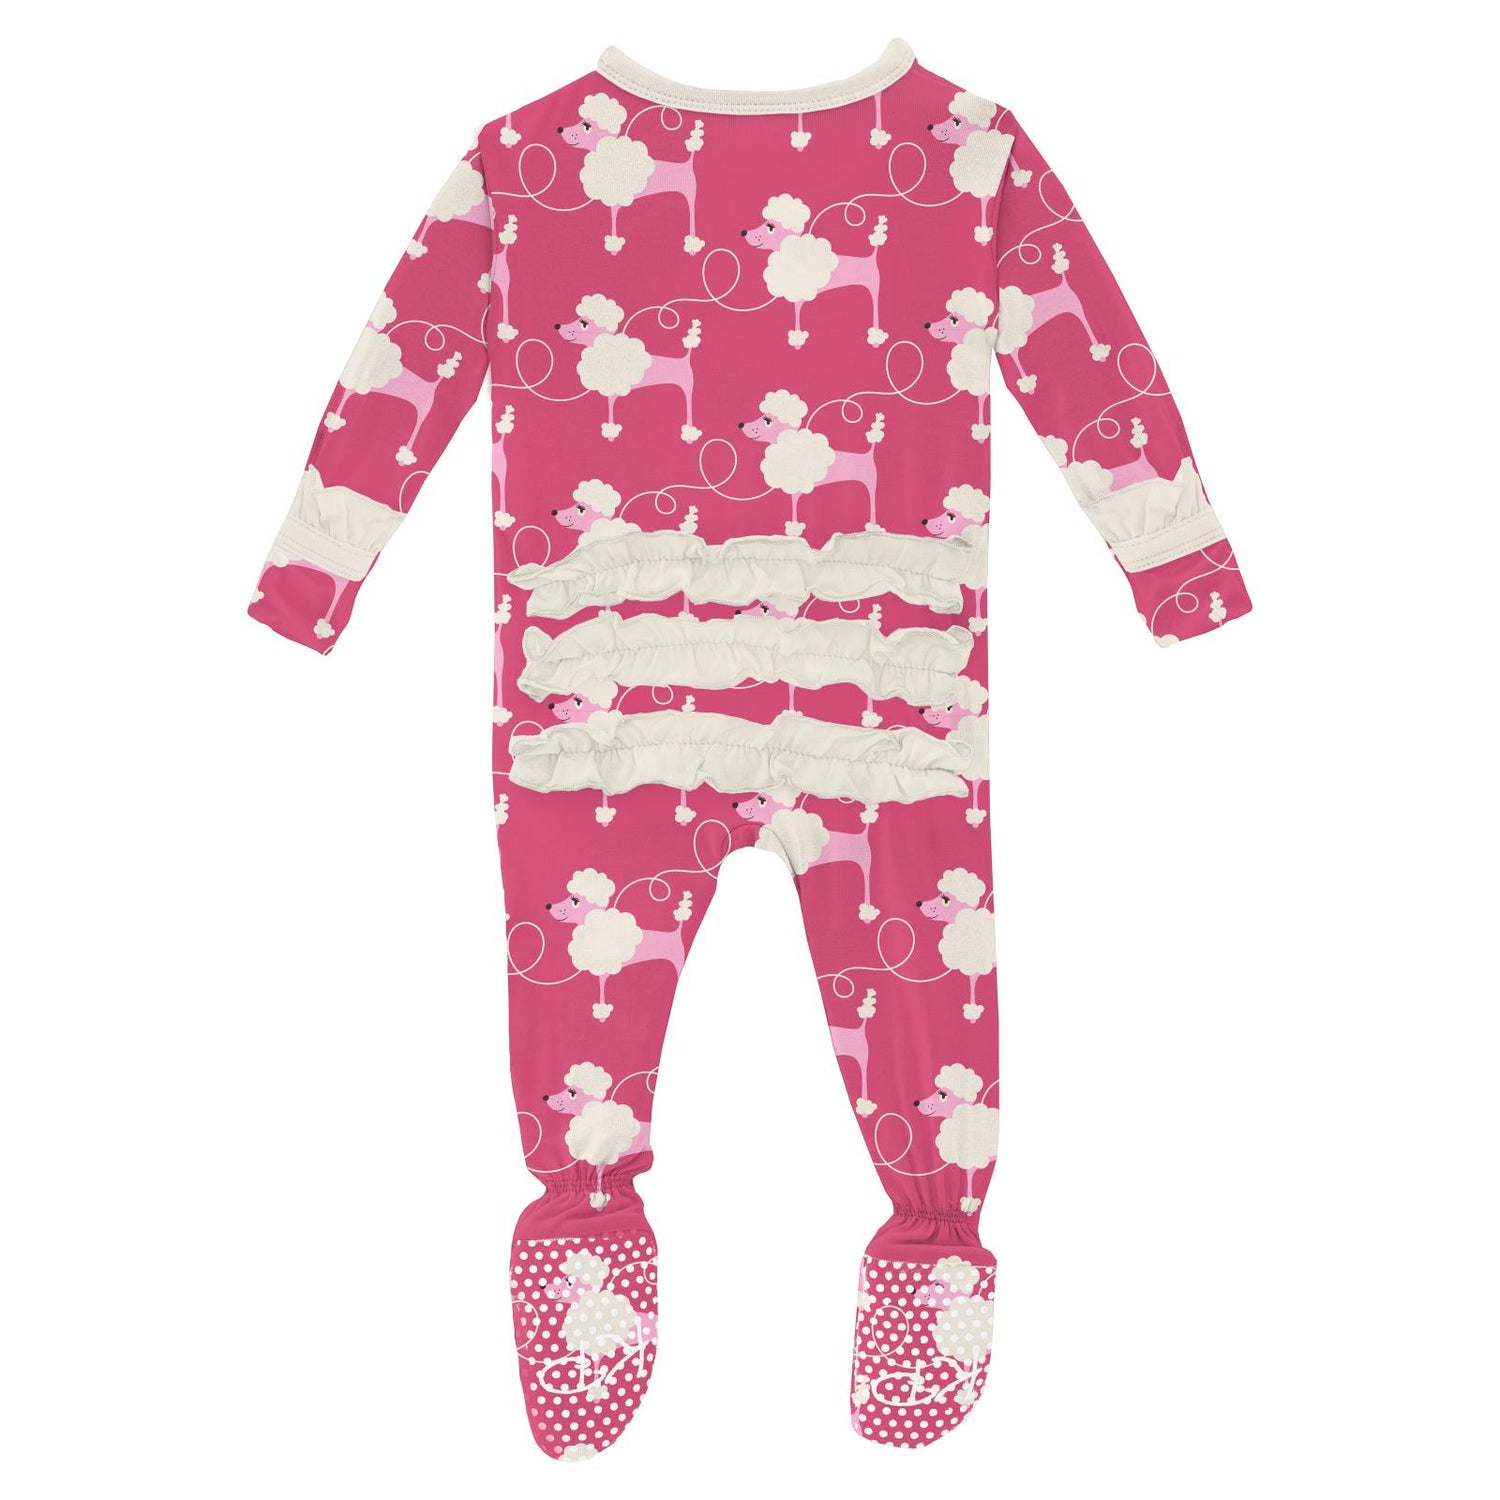 Print Classic Ruffle Footie with Snaps in Flamingo Poodles